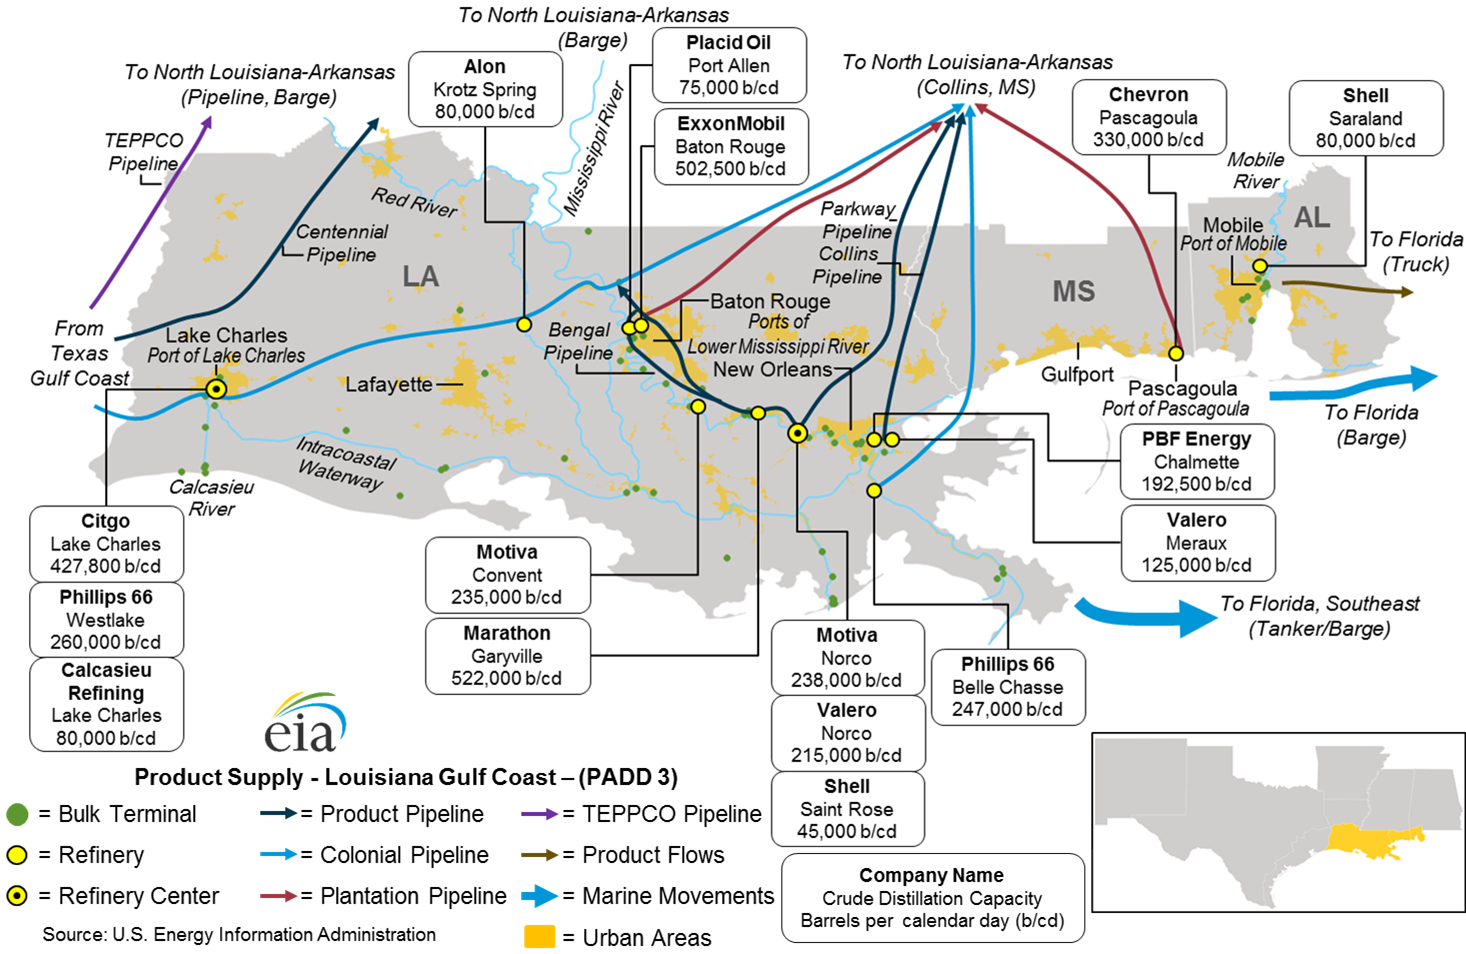 East Coast And Gulf Coast Transportation Fuels Markets - Energy - Texas Refineries Map